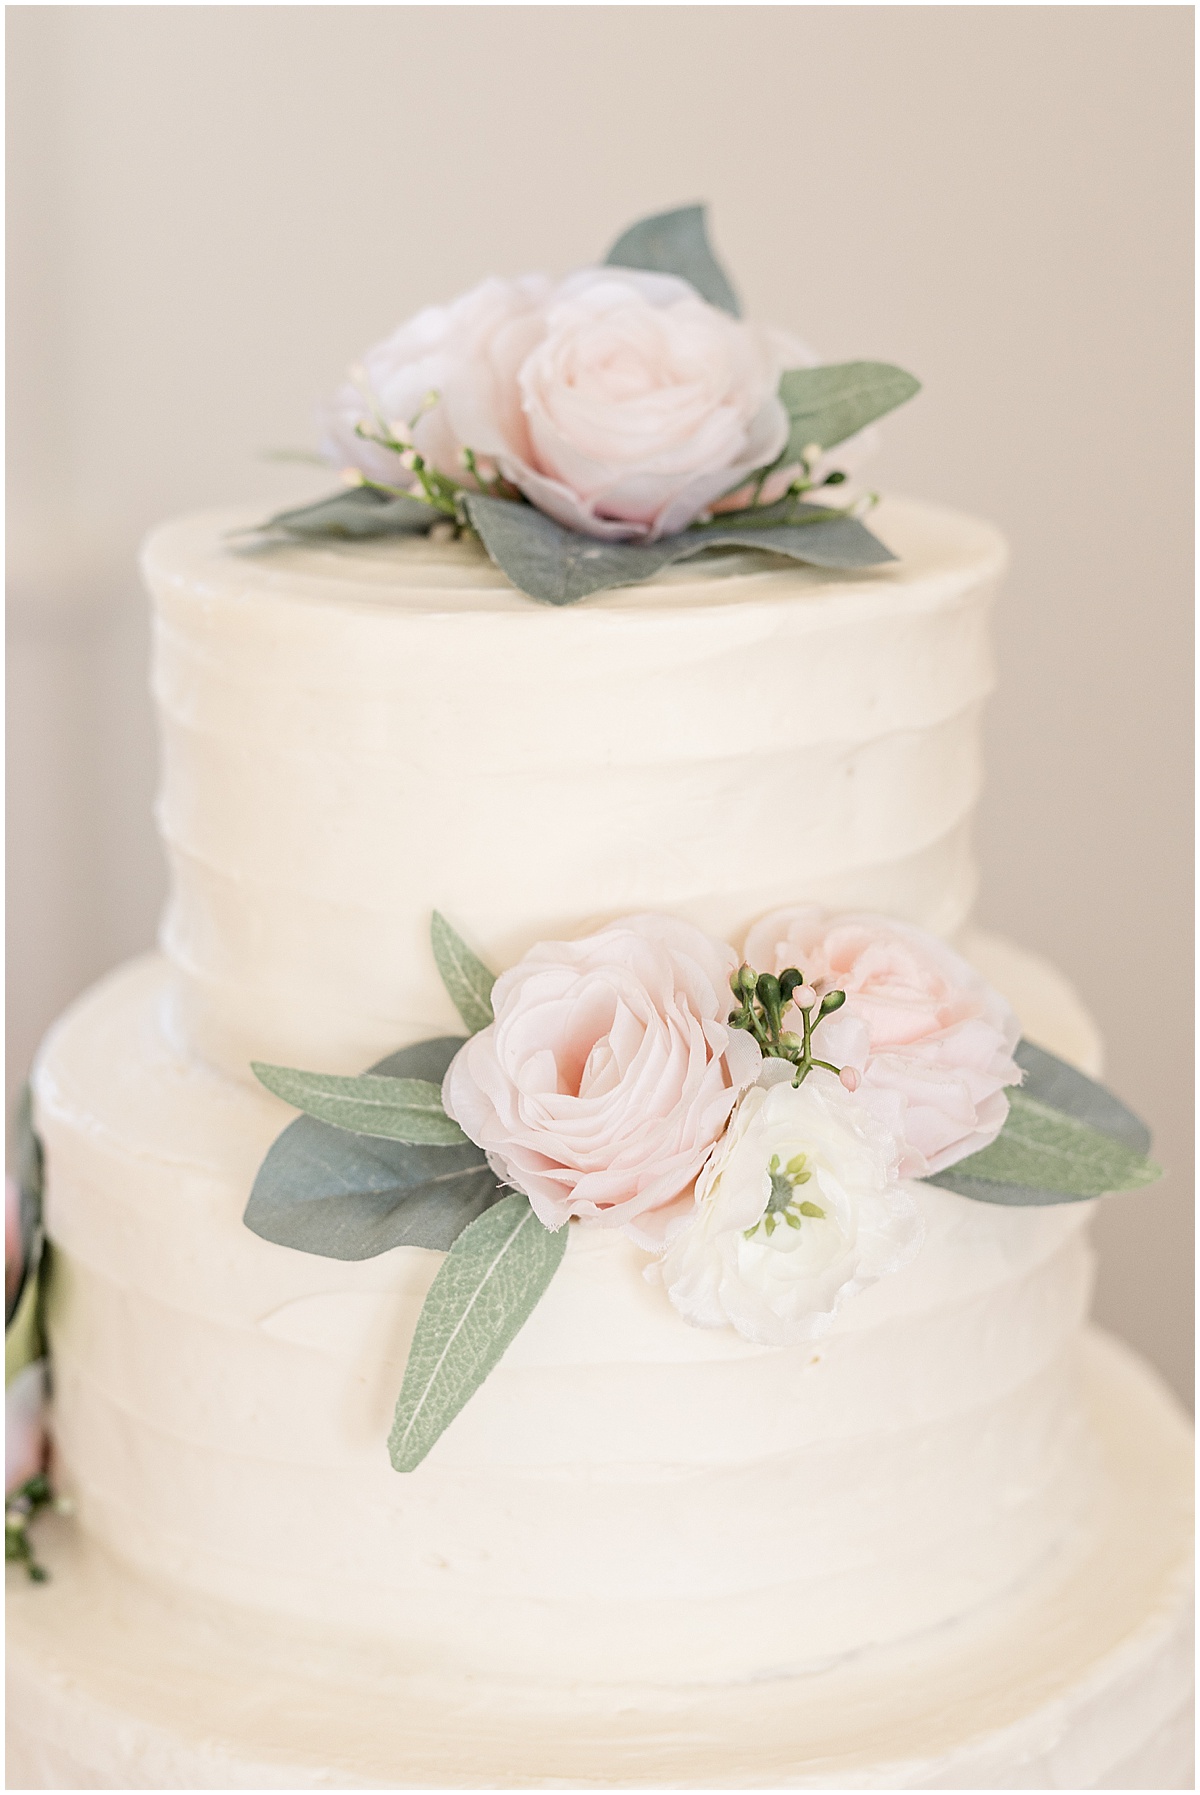 Wedding cake with pink flowers for pastel wedding at New Journey Farms in Lafayette, Indiana